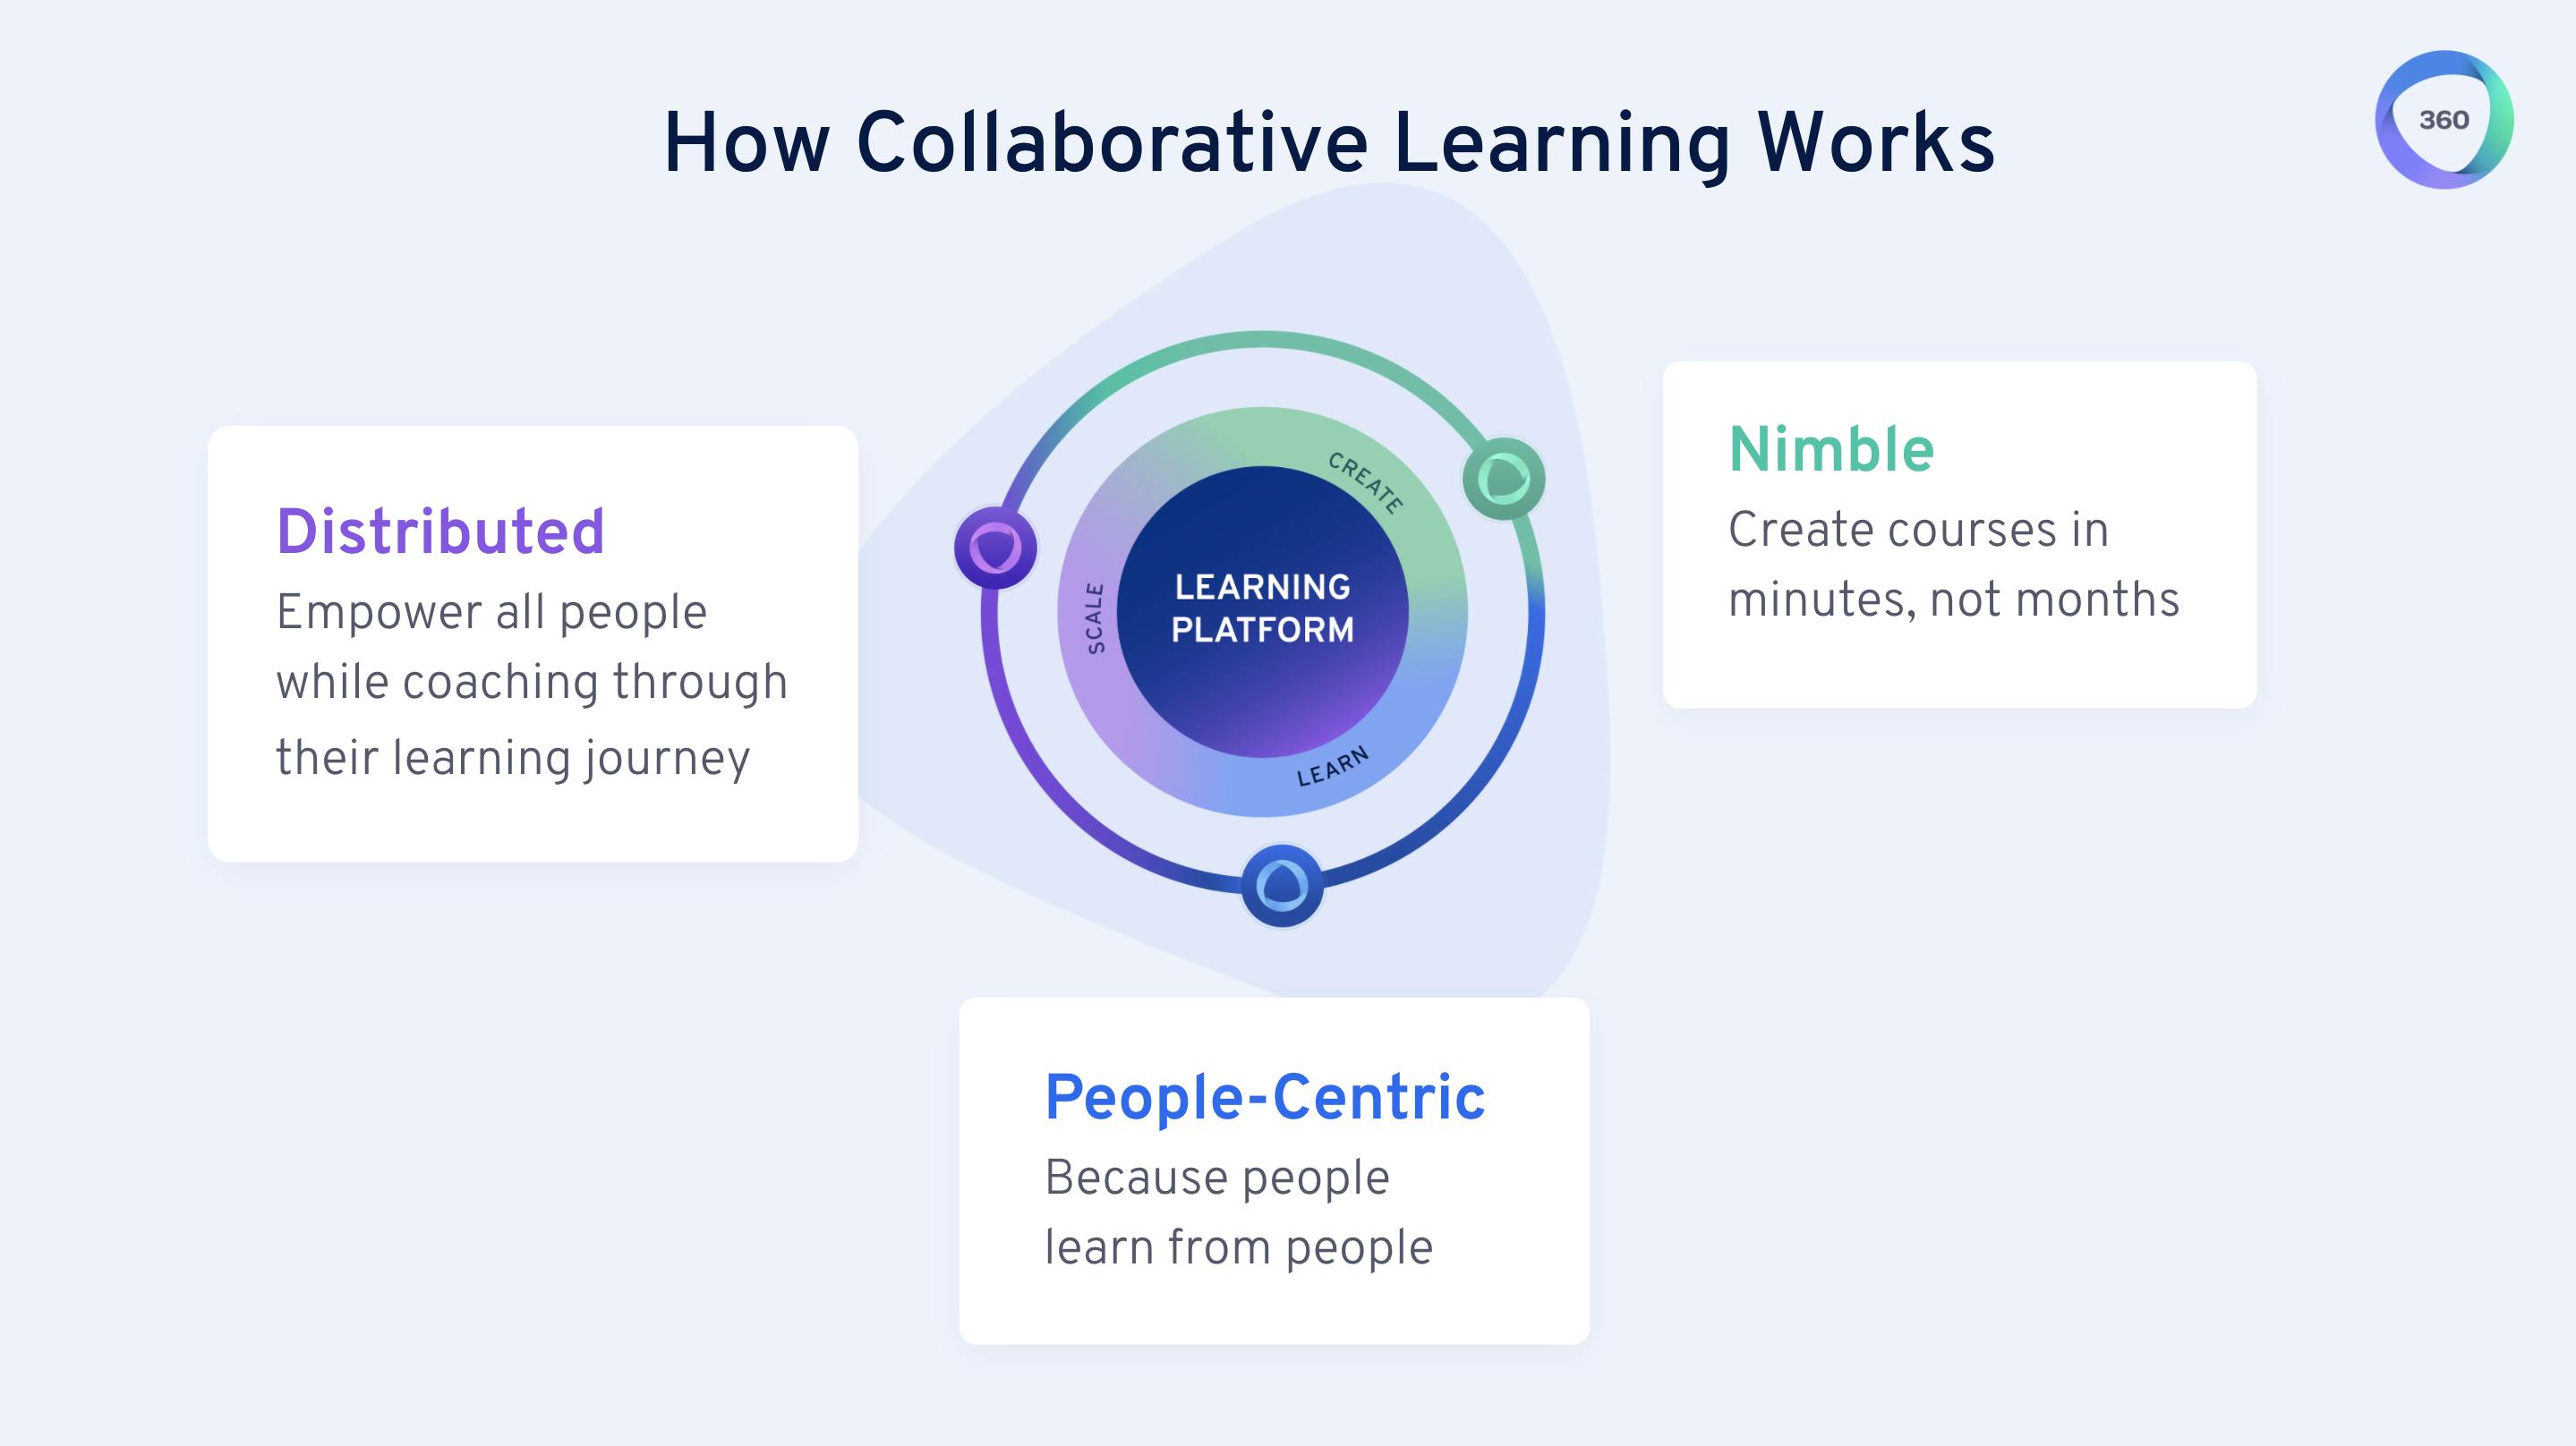 How collaborative learning works